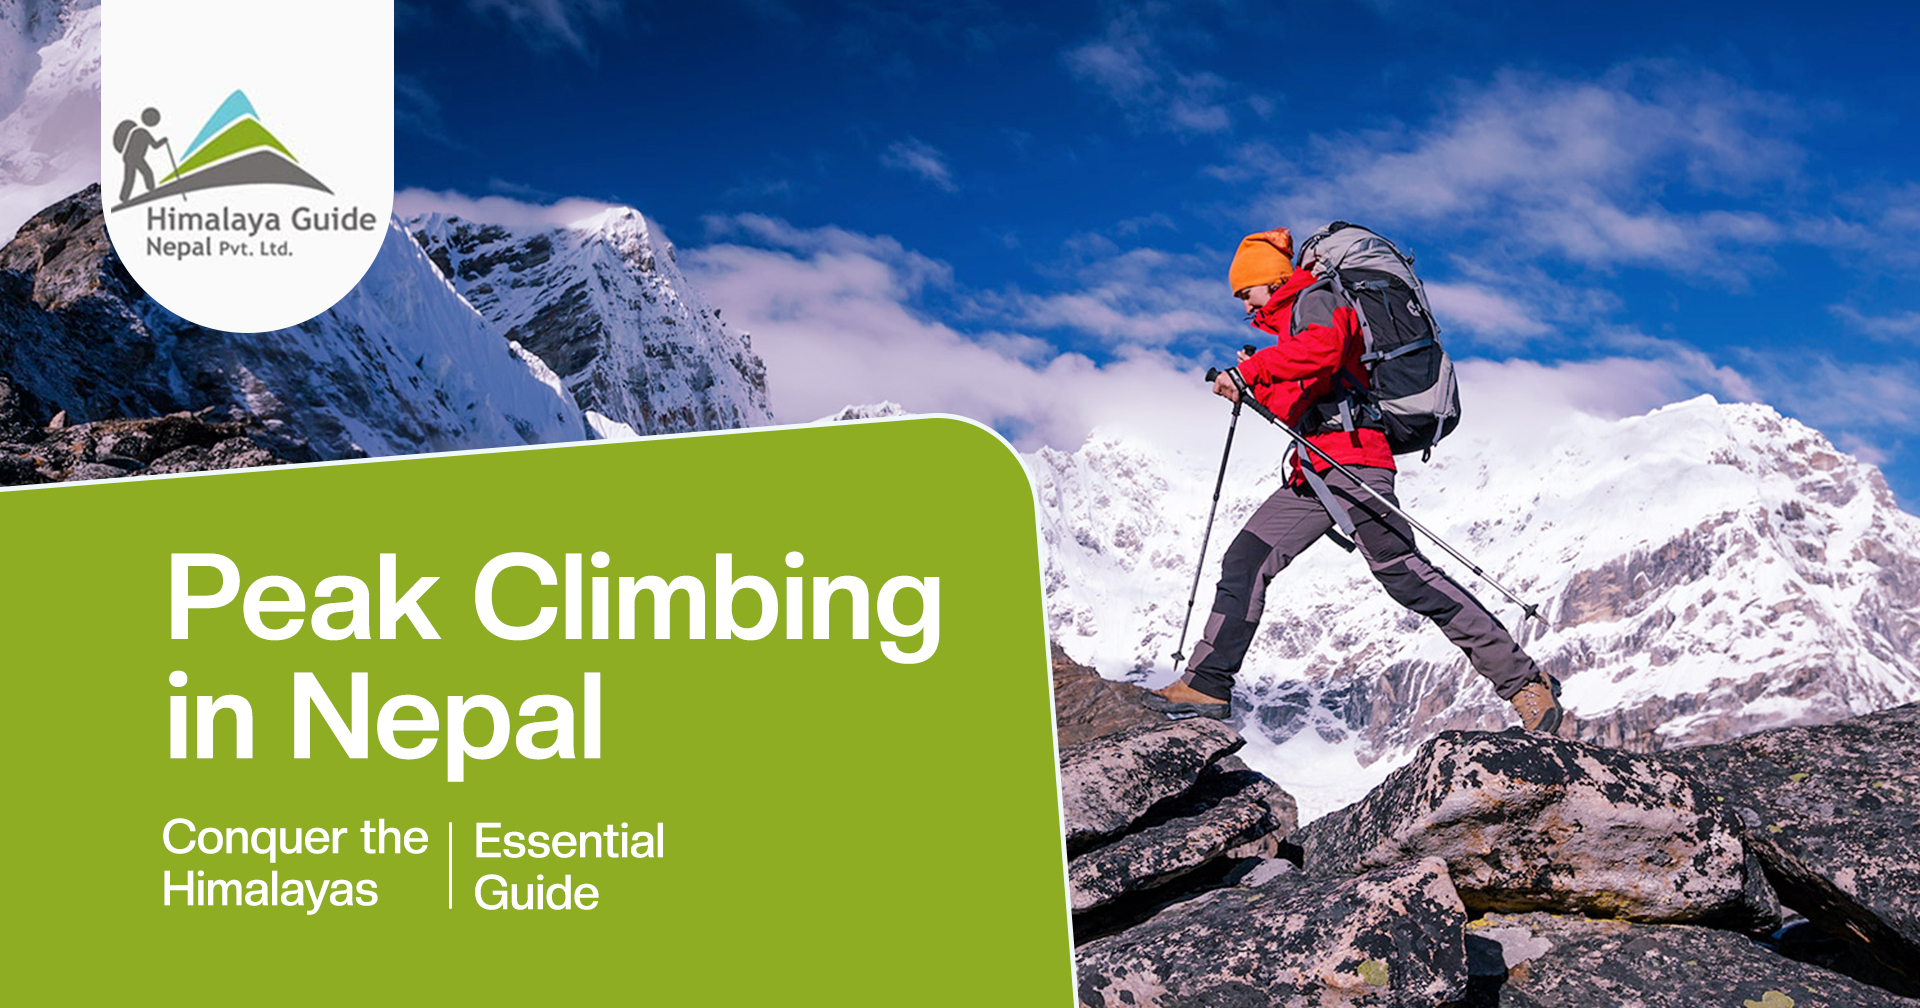 Peak Climbing? Quick Facts about Mountain to Climb in Nepal